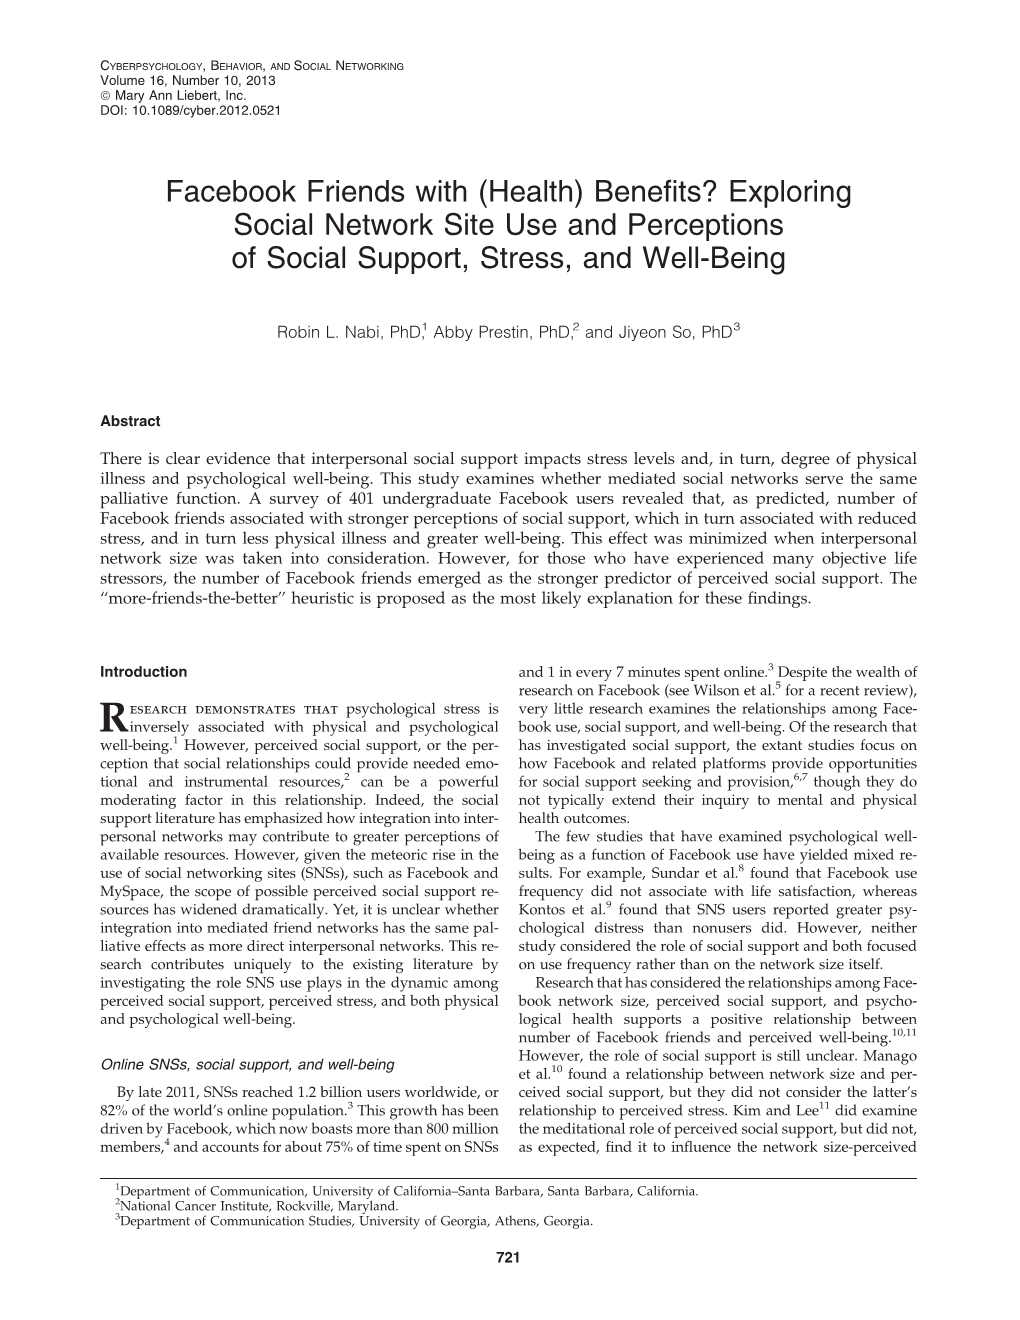 Facebook Friends with (Health) Benefits? Exploring Social Network Site Use and Perceptions of Social Support, Stress, and Well-B